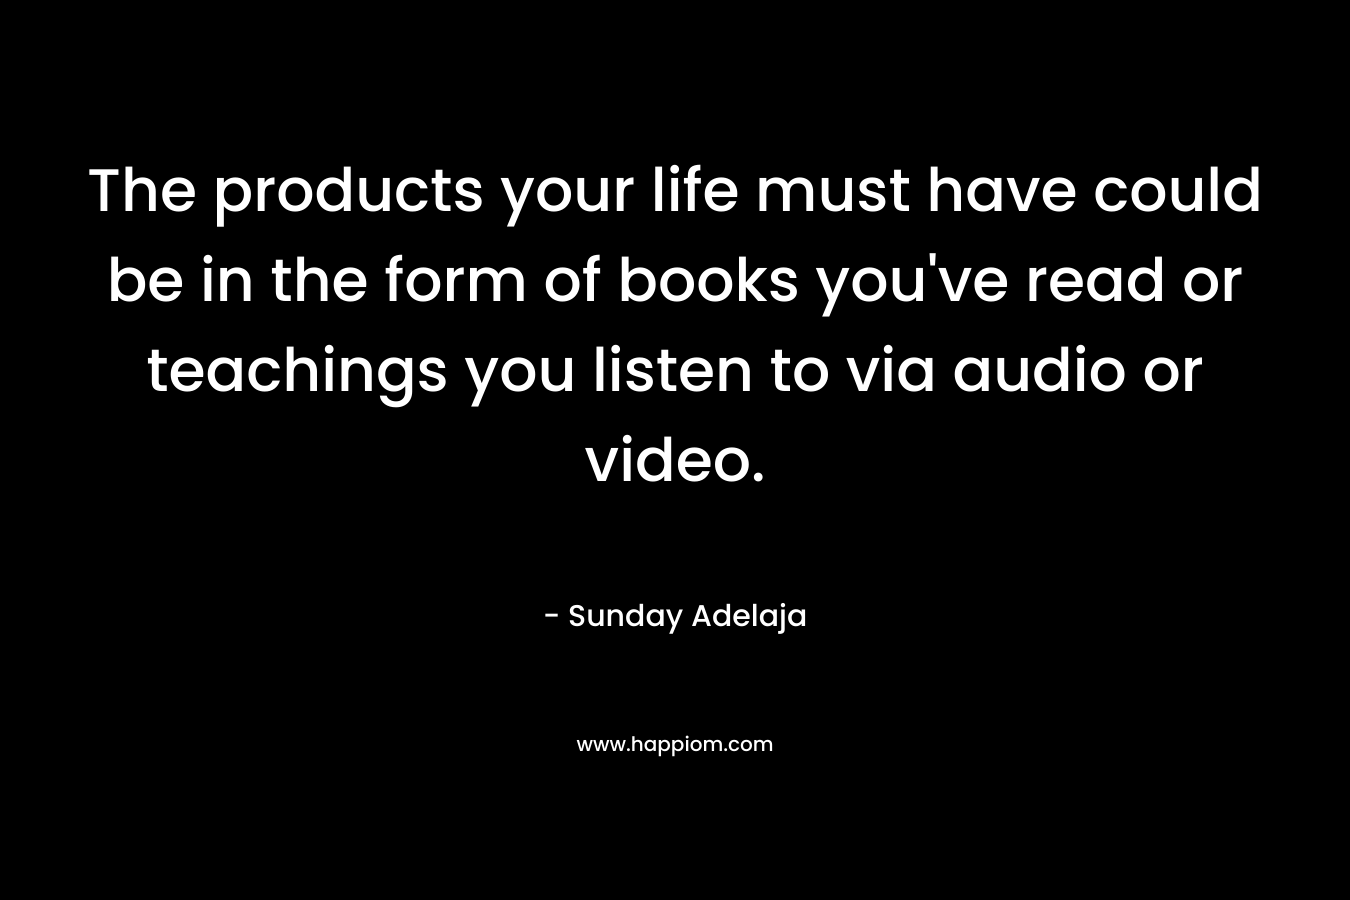 The products your life must have could be in the form of books you've read or teachings you listen to via audio or video.